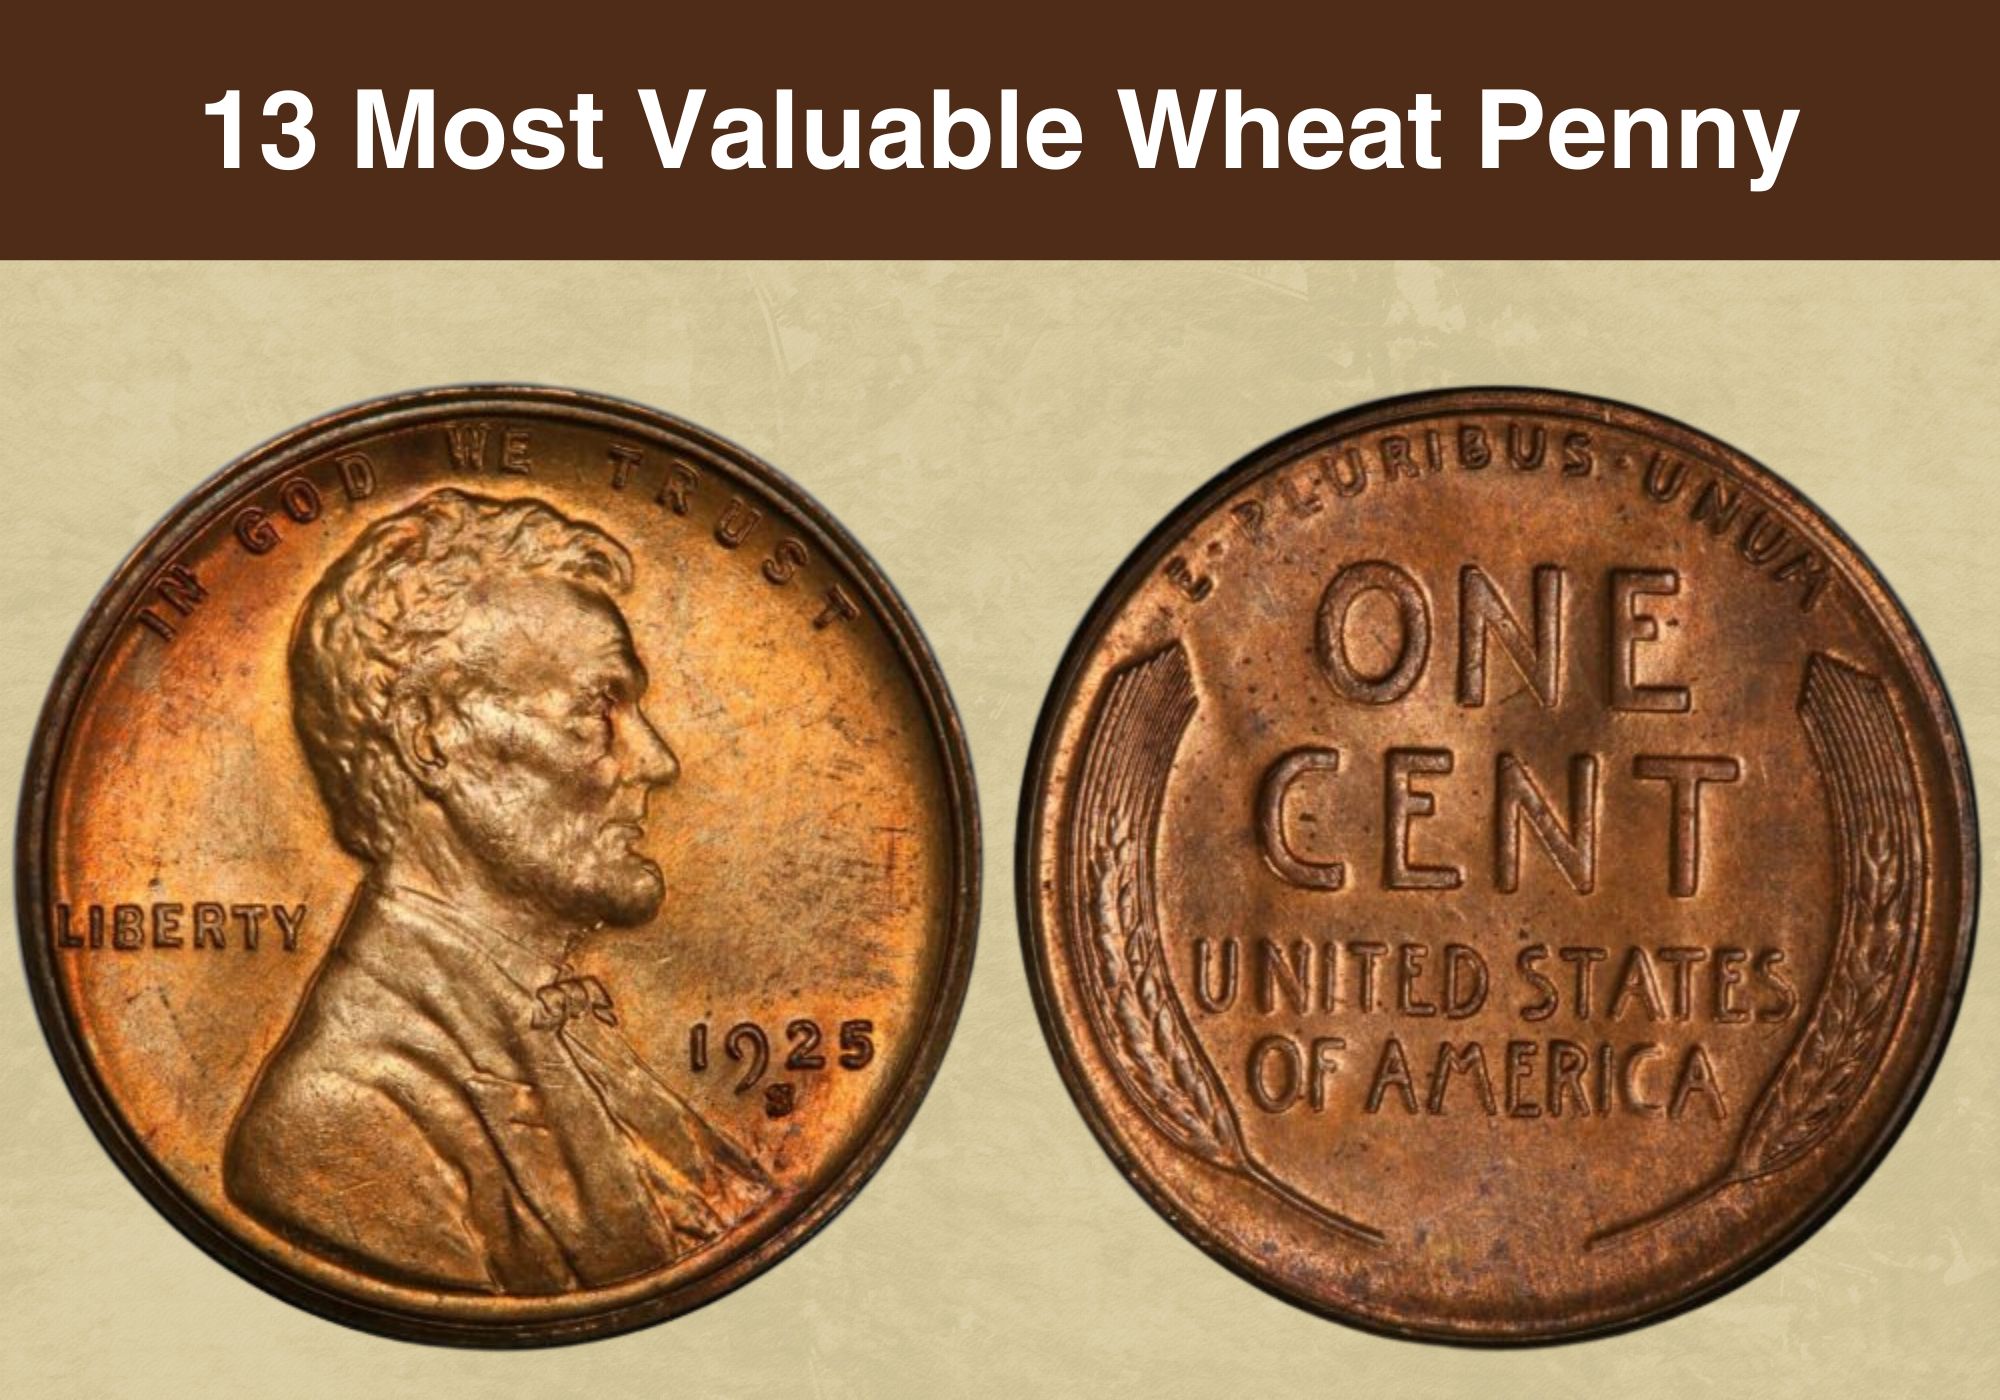 13 Most Valuable Wheat Penny